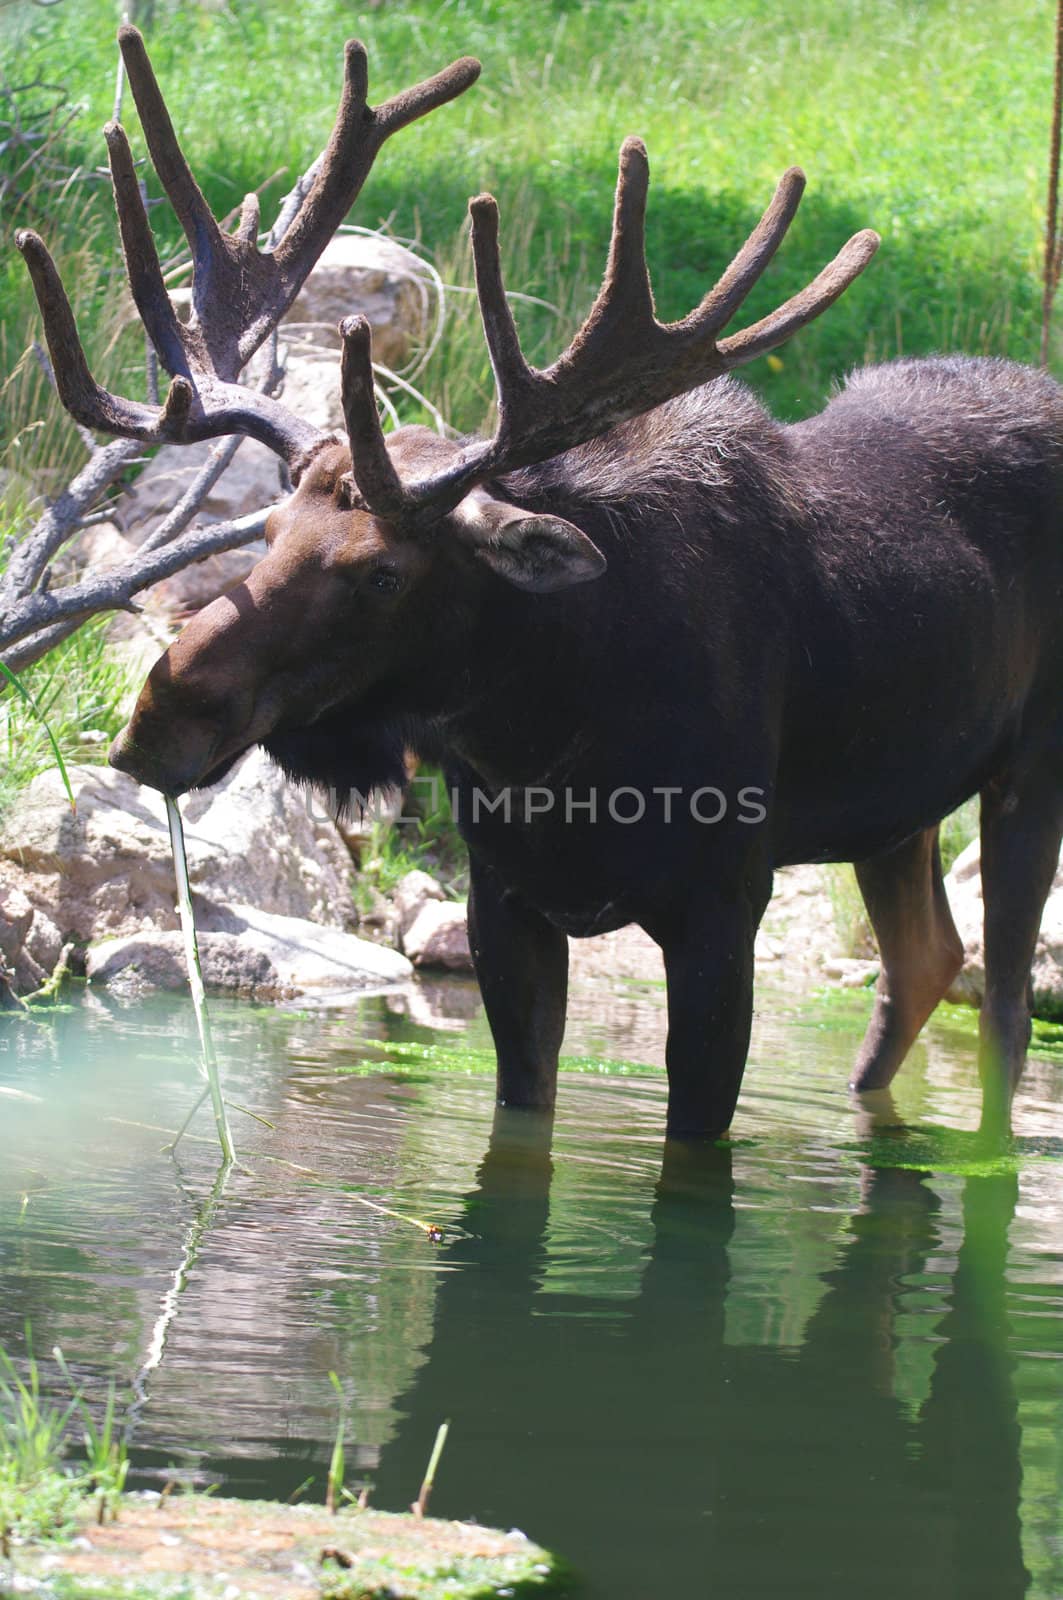 A bull moose standing in a pond eating grass in Colorado